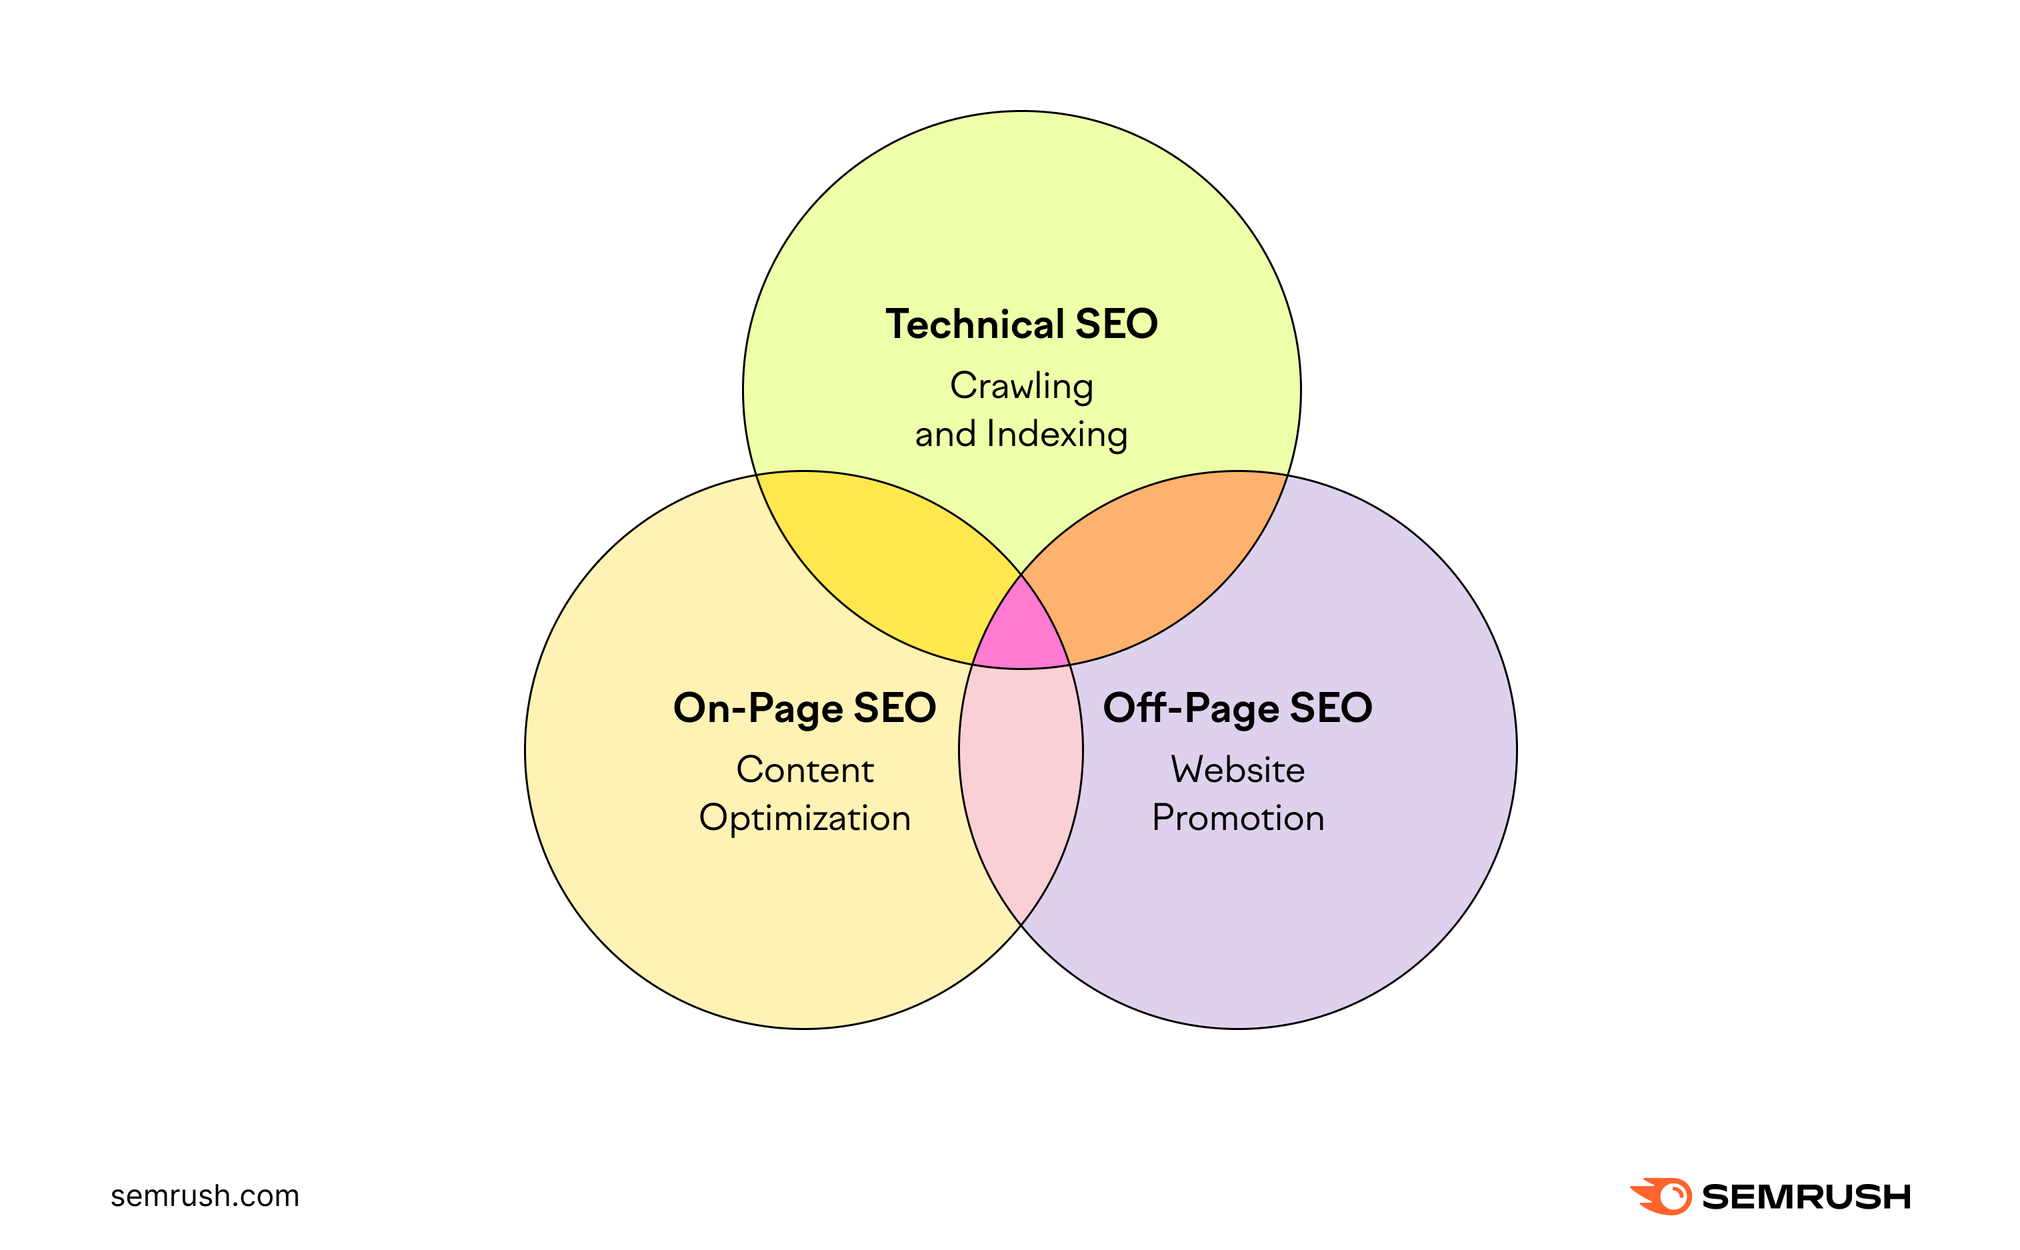  method  SEO, on-page SEO, and off-page SEO